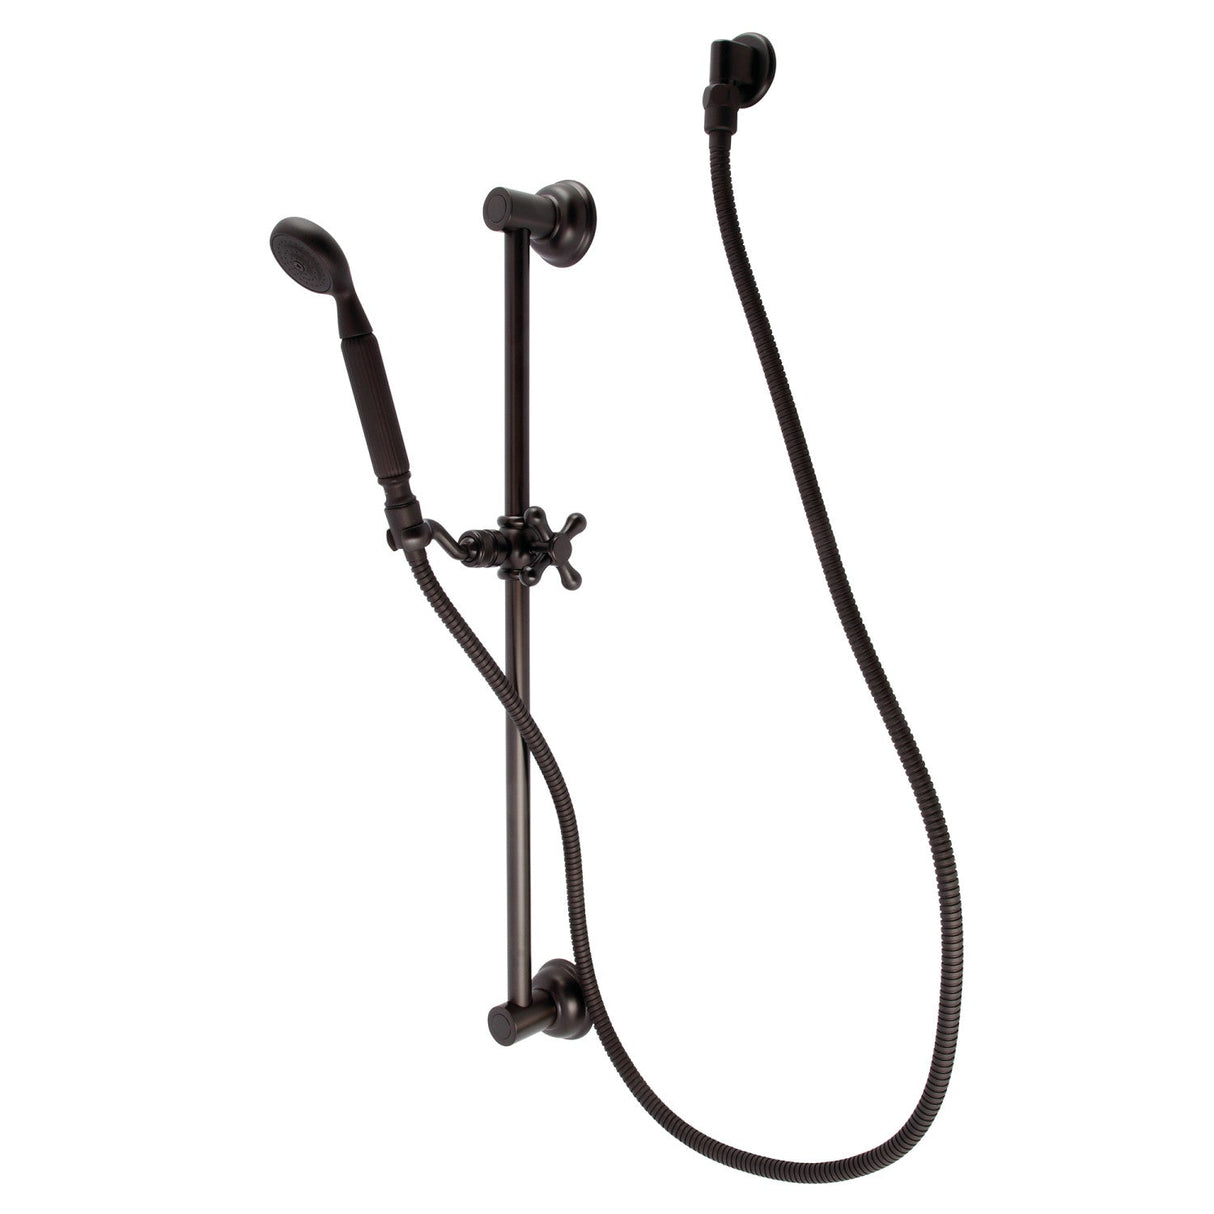 Made To Match KAK3425W5 Hand Shower Combo with Slide Bar, Oil Rubbed Bronze